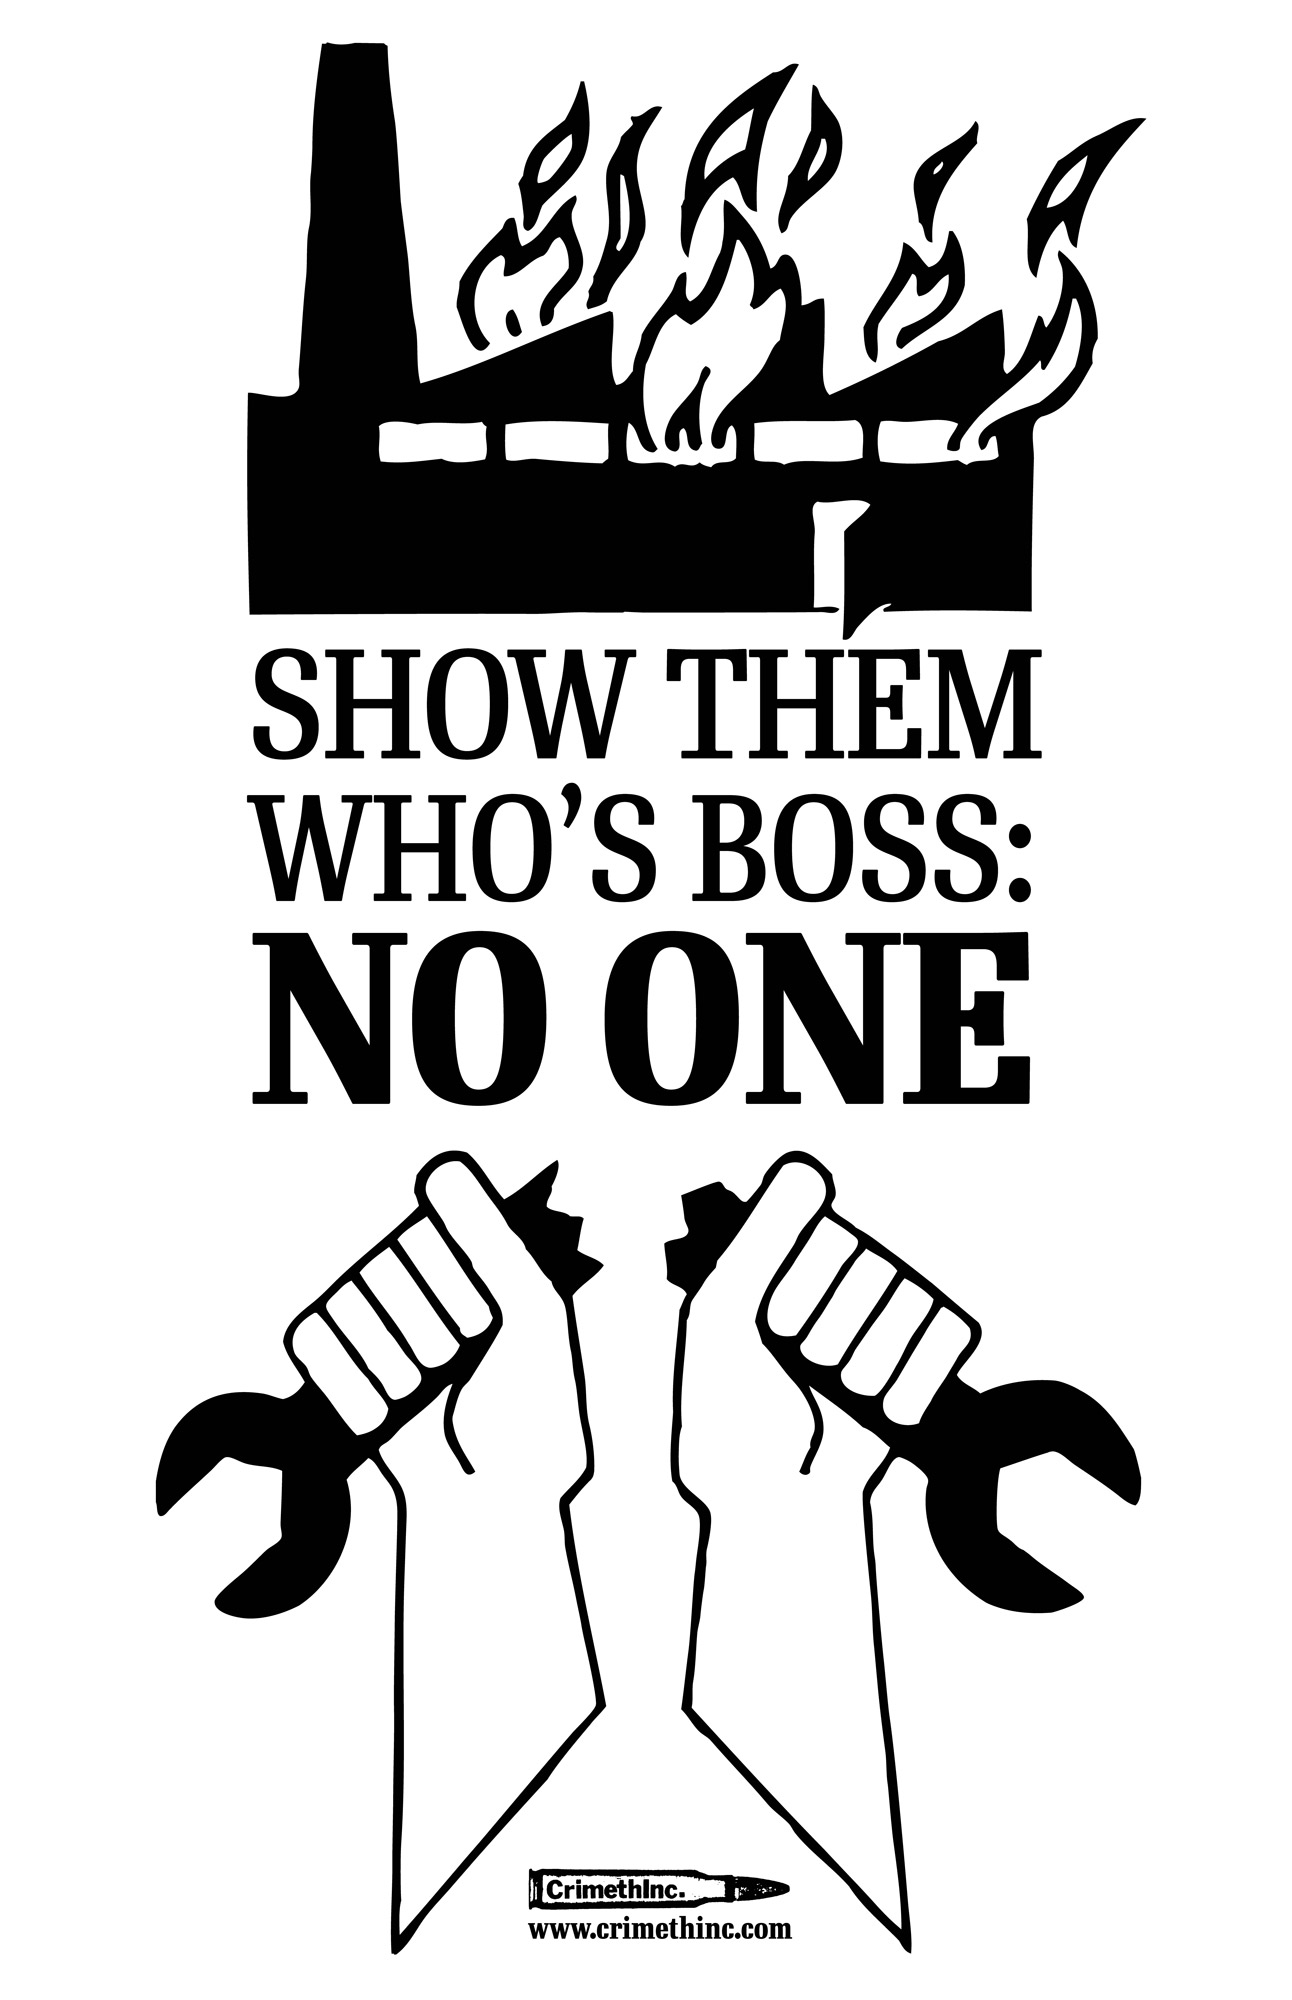 Photo of ‘Show Them Who's Boss: No One’ front side